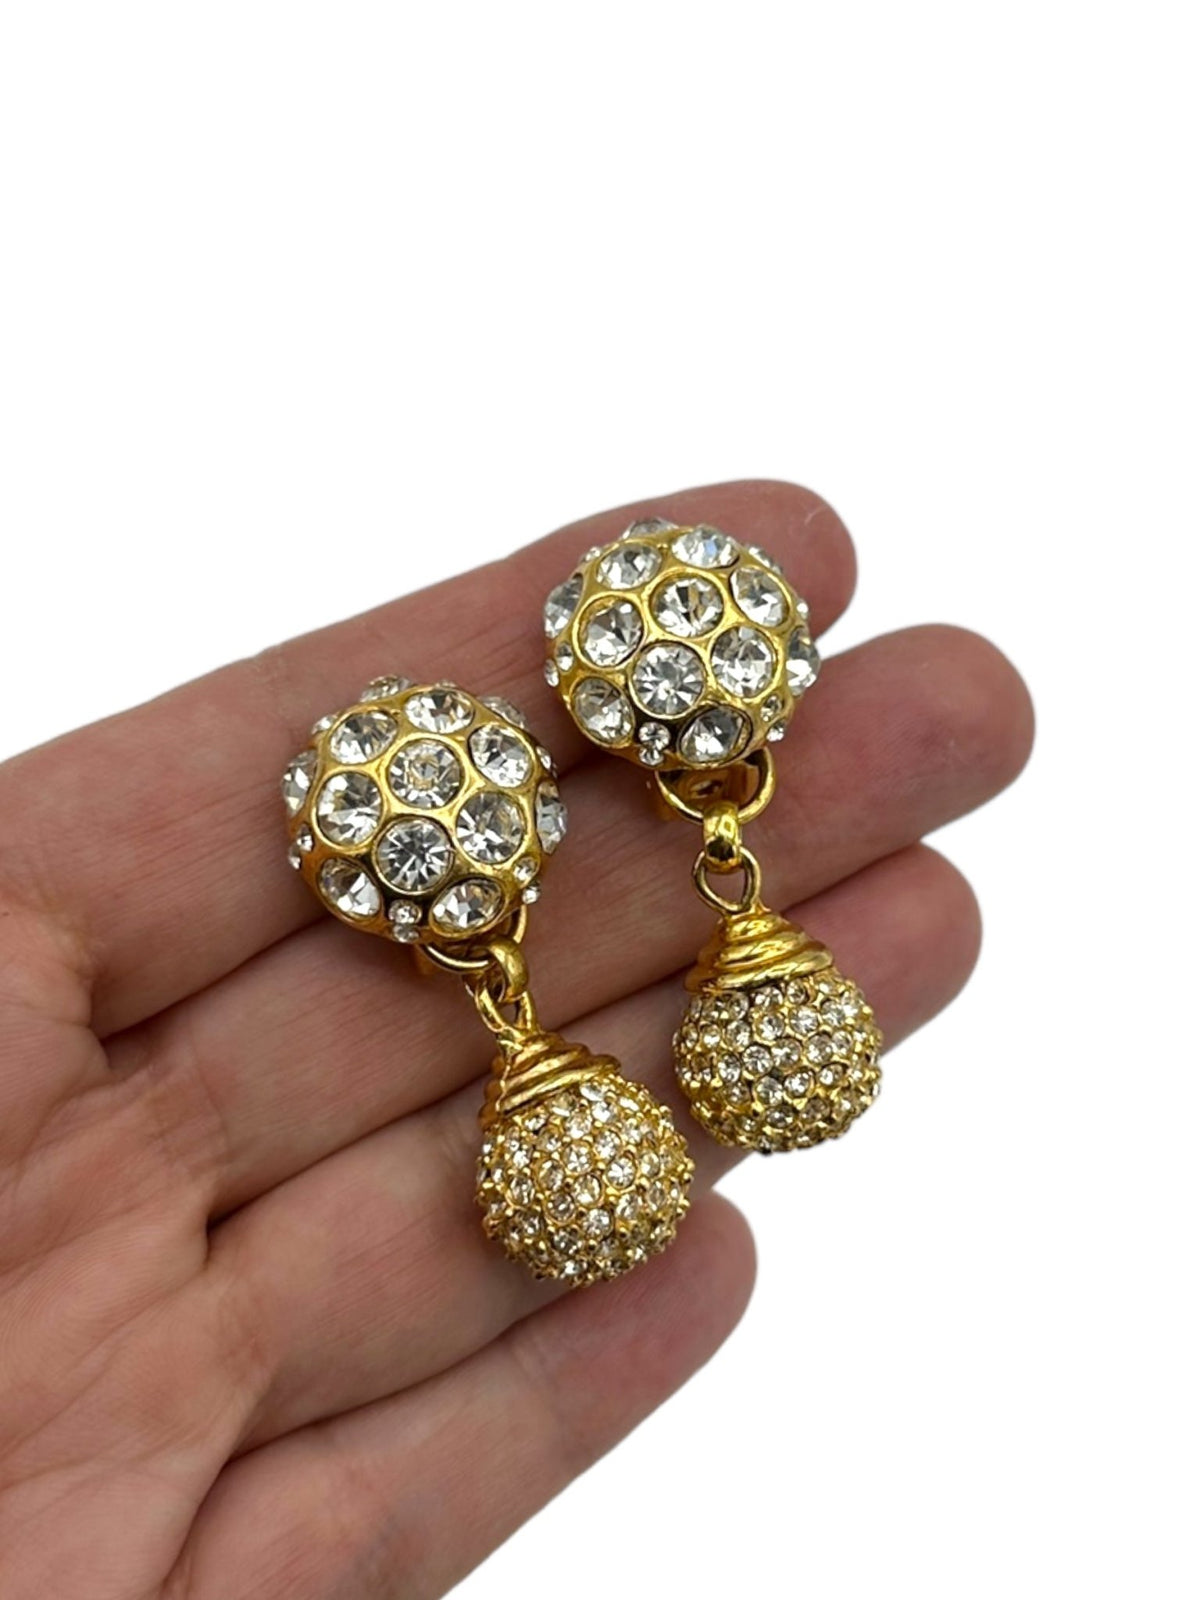 Blanca Gold Rhinestone Disco Ball Dangle Vintage Statement Clip-On Earrings - 24 Wishes Vintage Jewelry